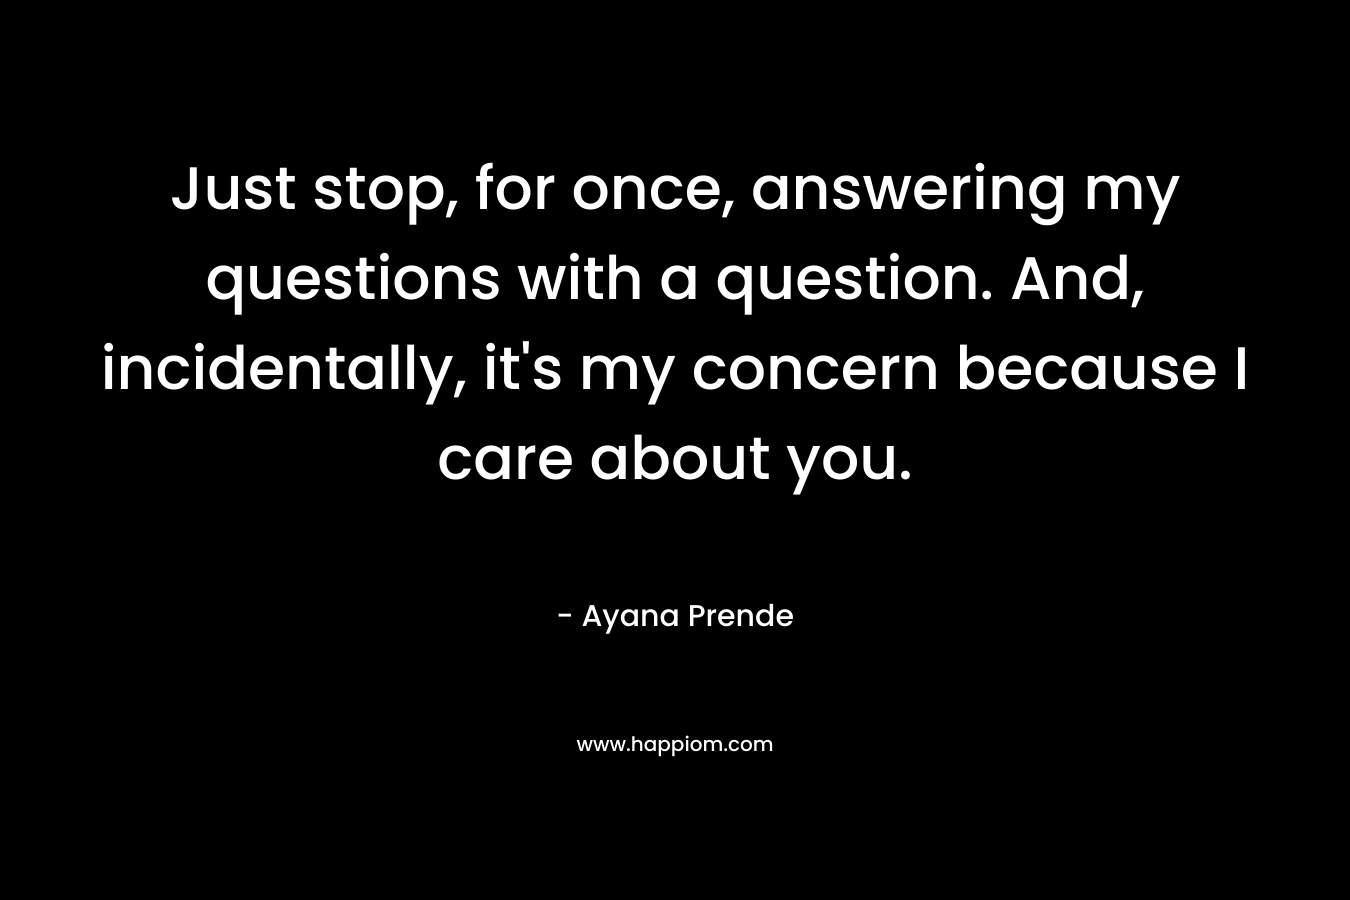 Just stop, for once, answering my questions with a question. And, incidentally, it's my concern because I care about you.